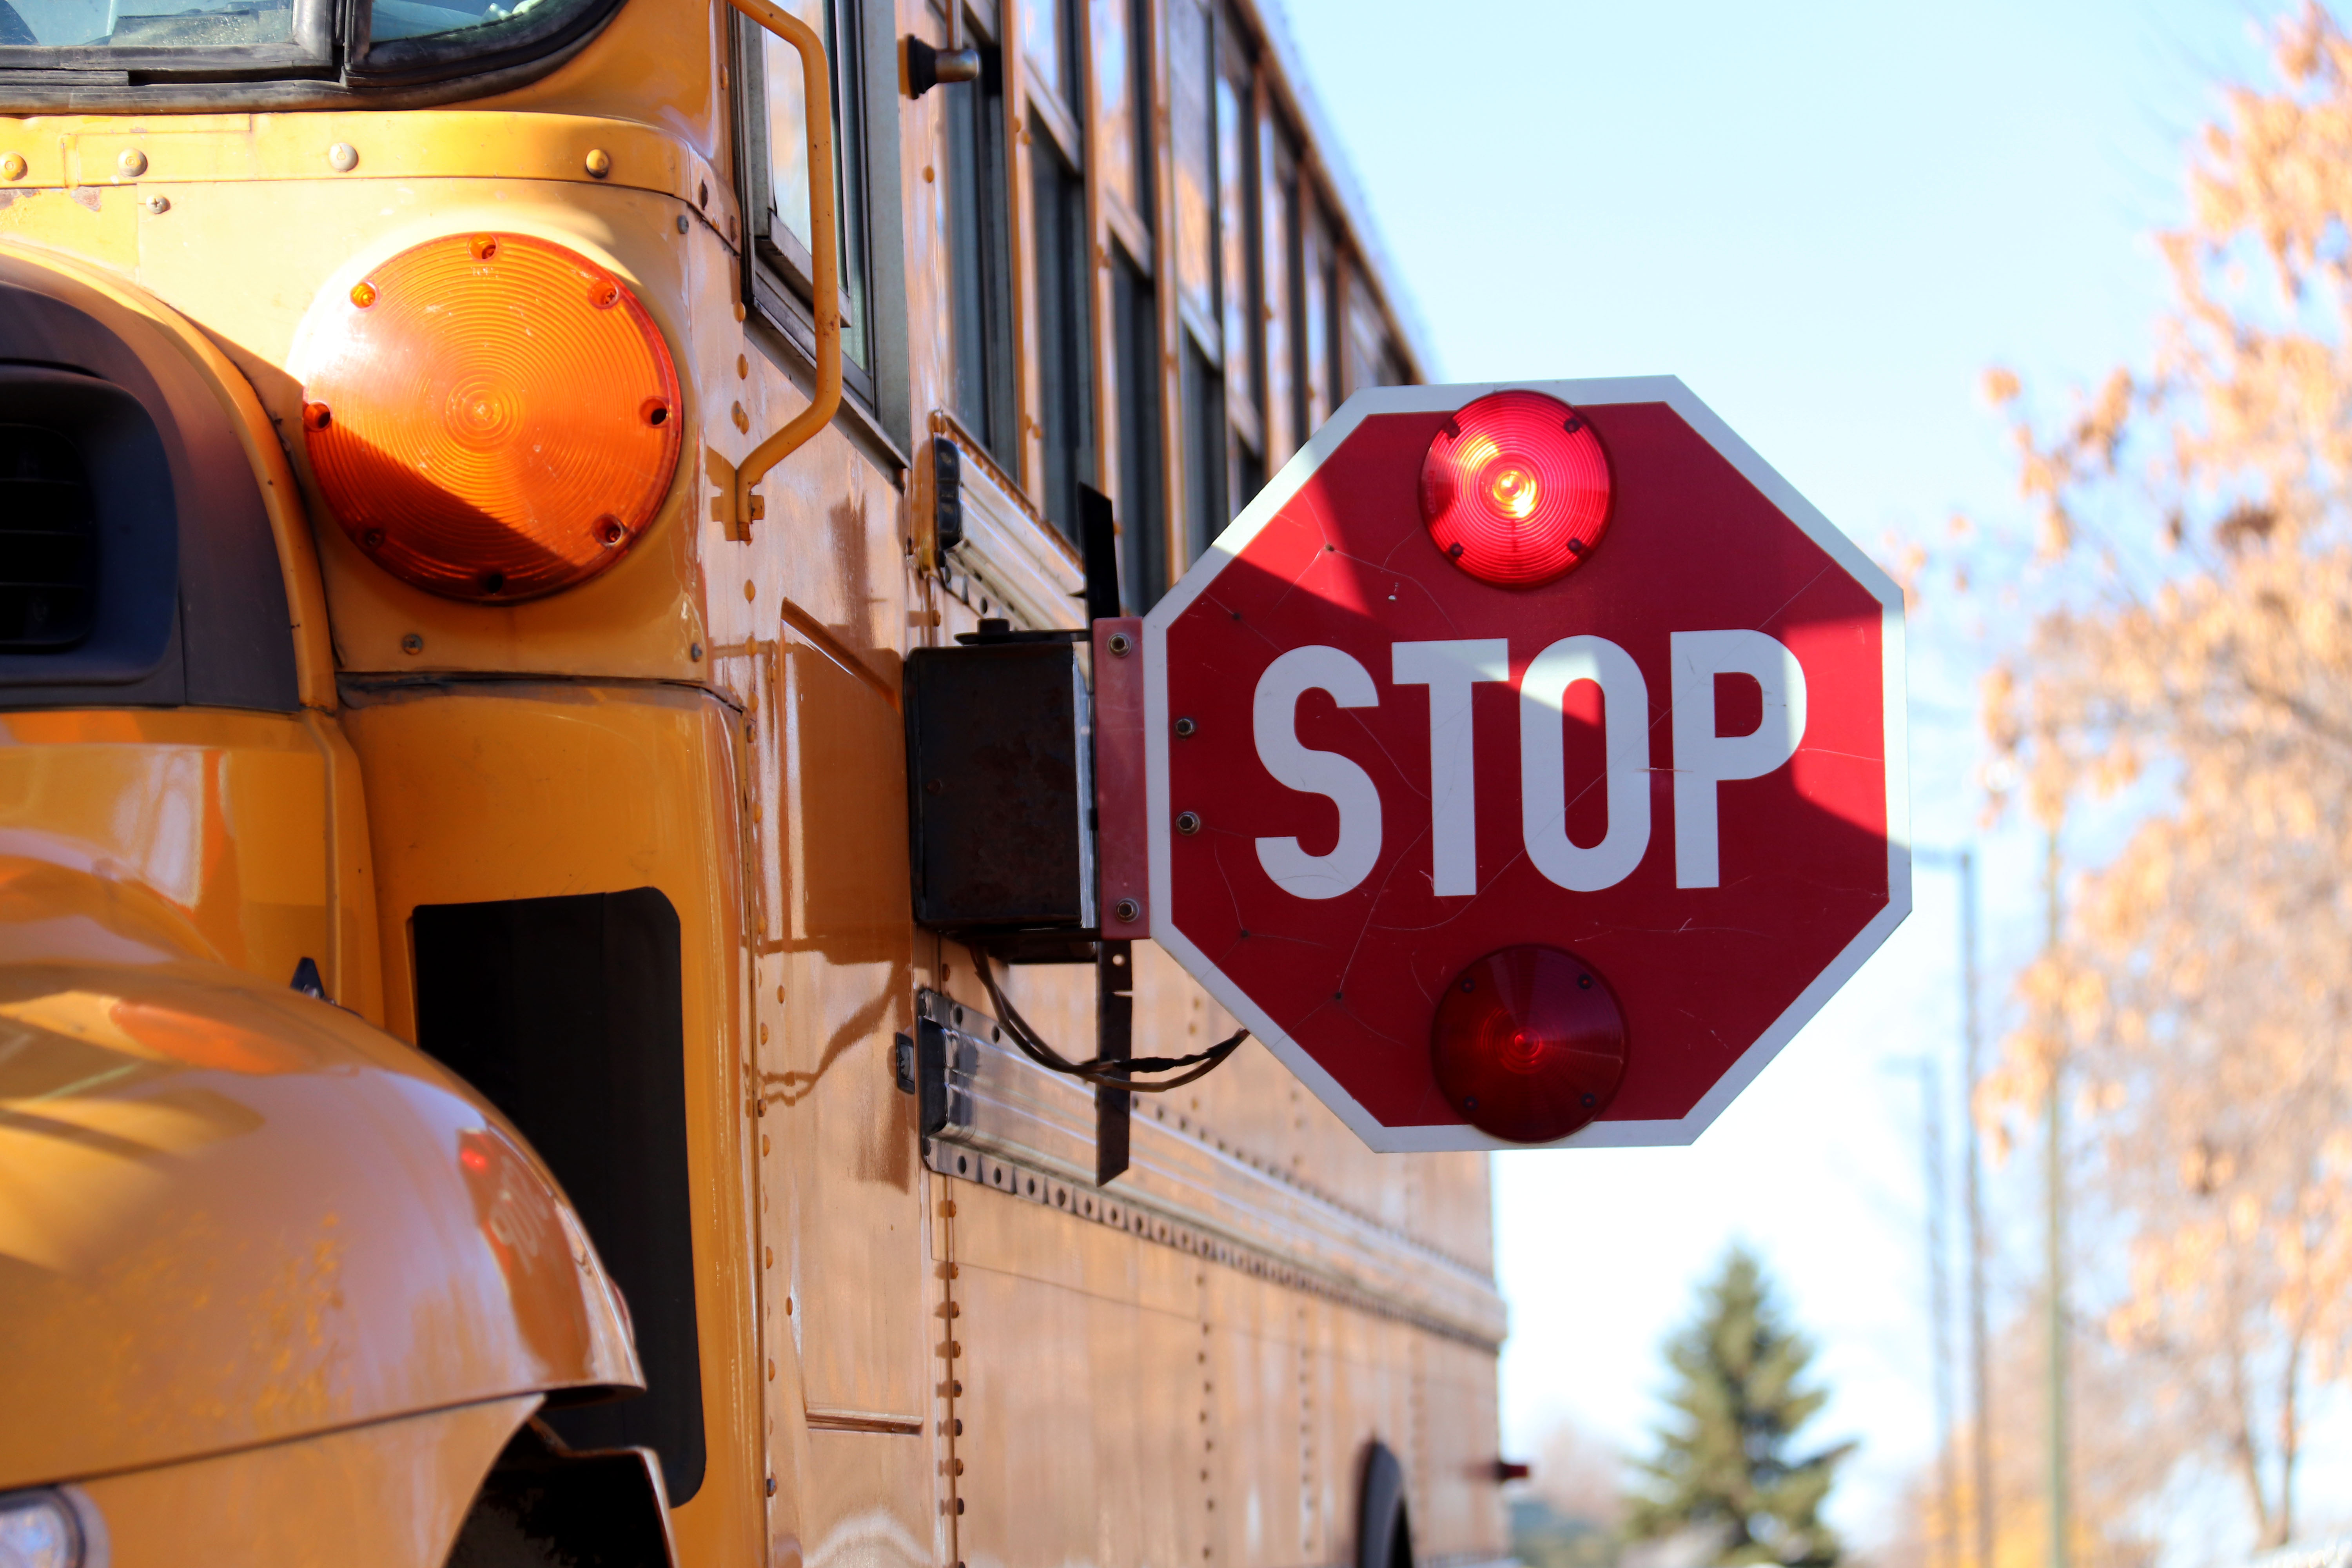 School bus stop sign flashing red lights